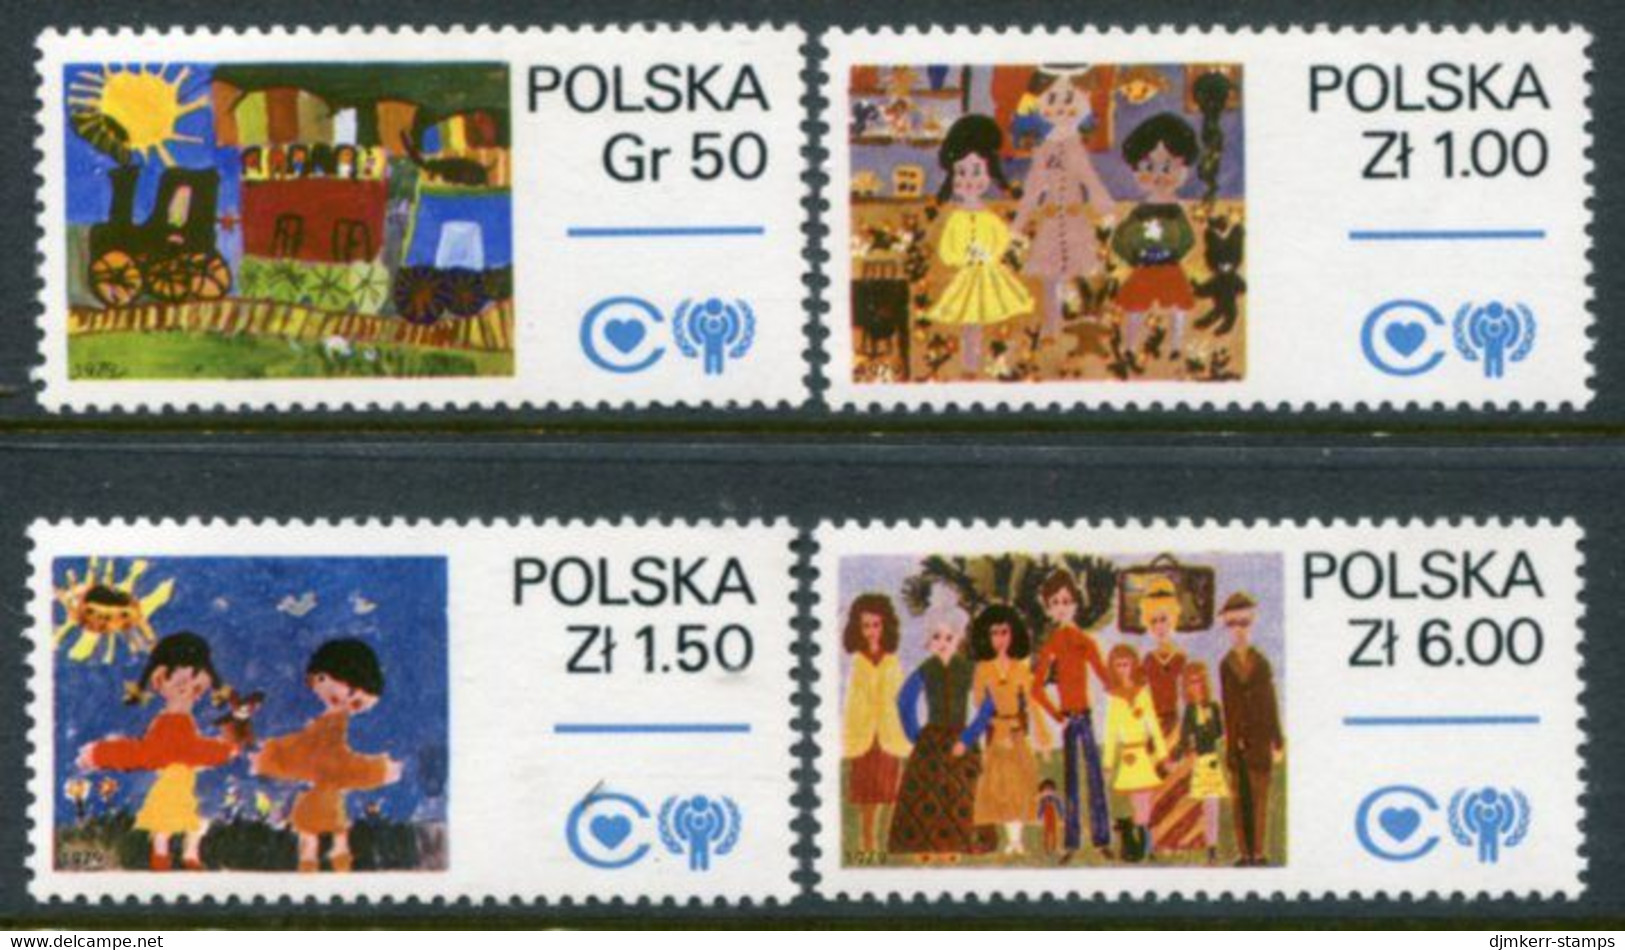 POLAND 1979 Year Of The Child MNH / **.  Michel 2603-06 - Unused Stamps